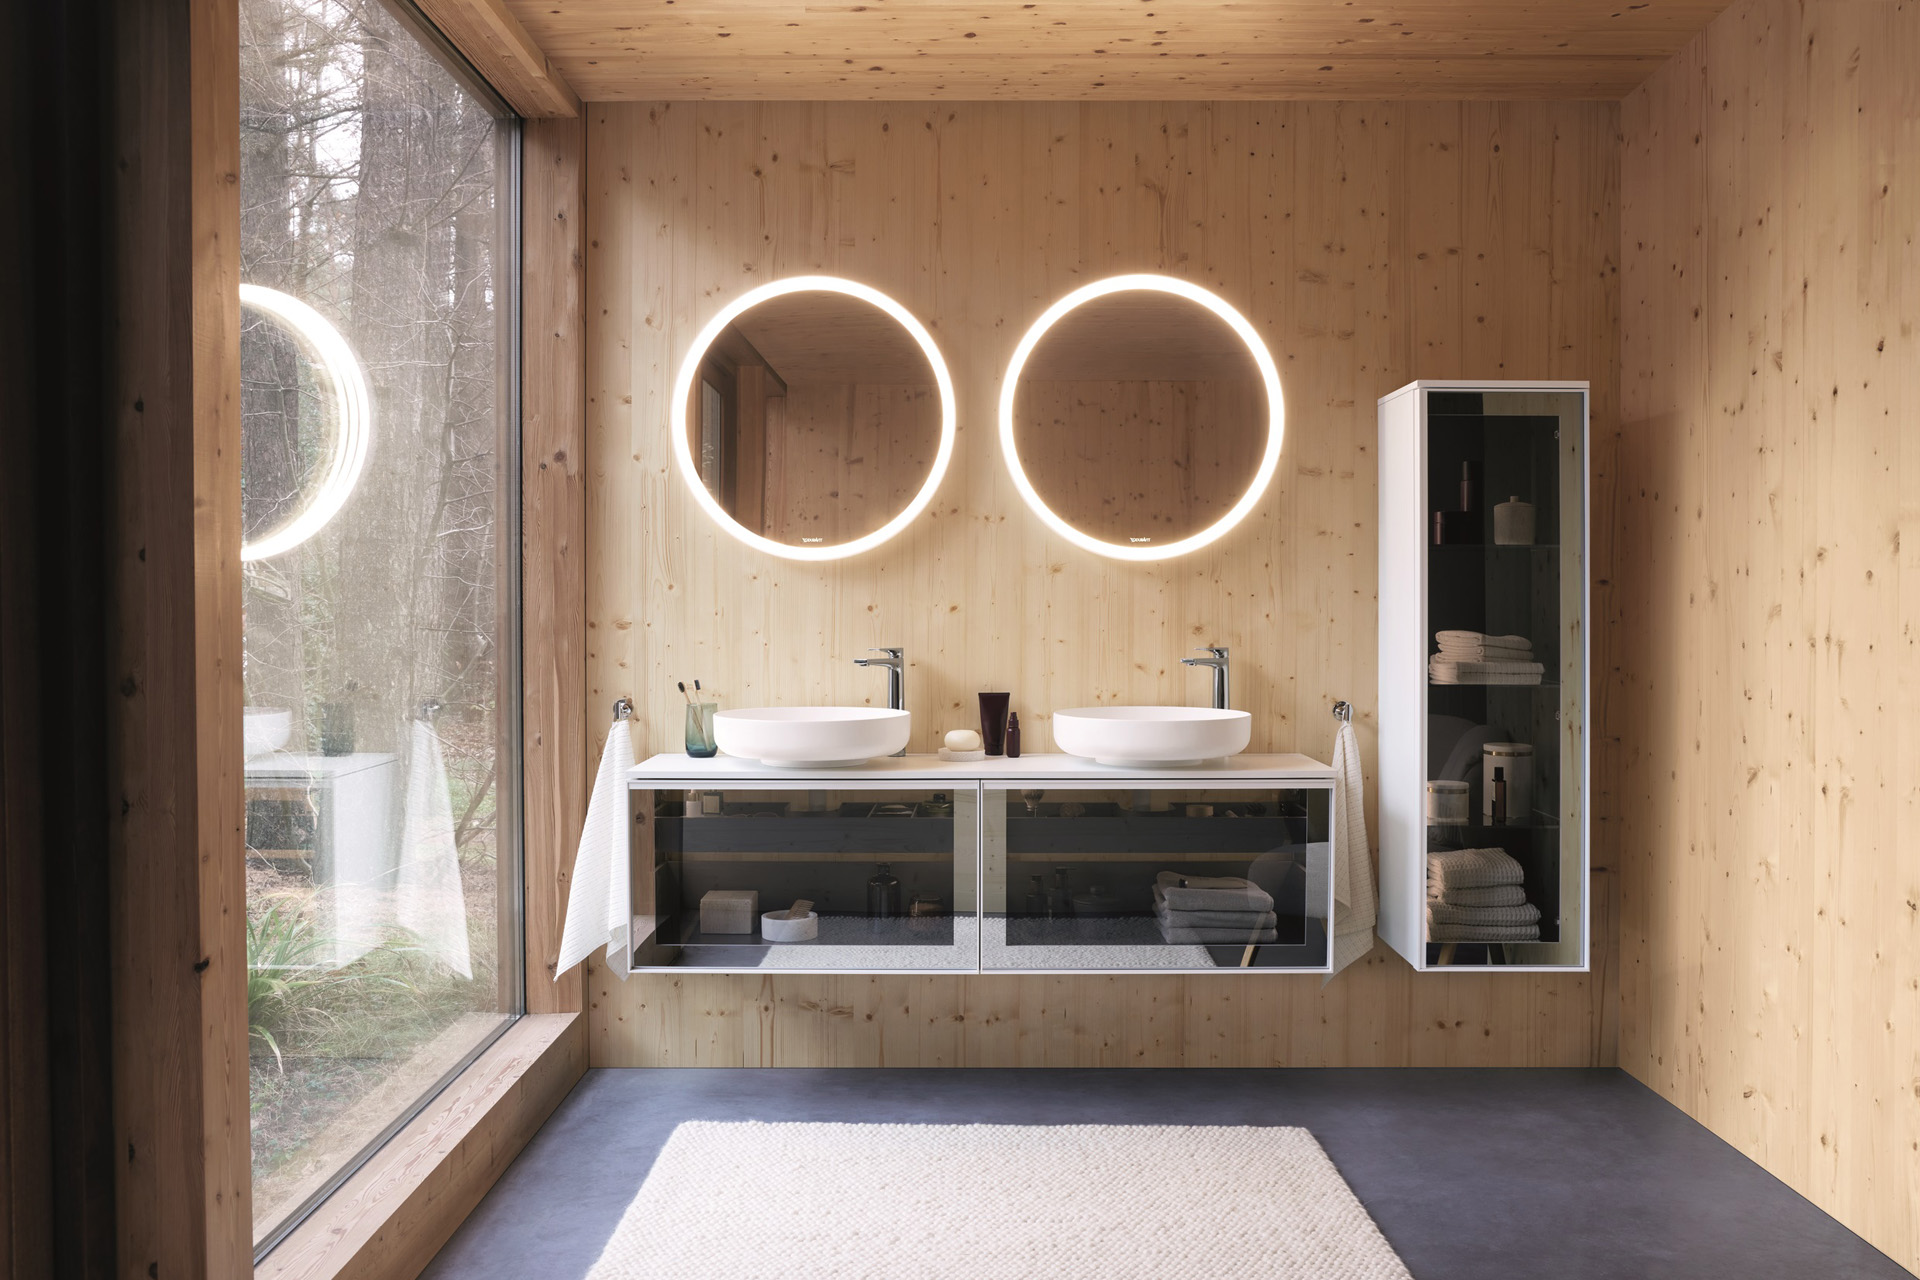 A small bathroom designed by Christian Werner by Duravit